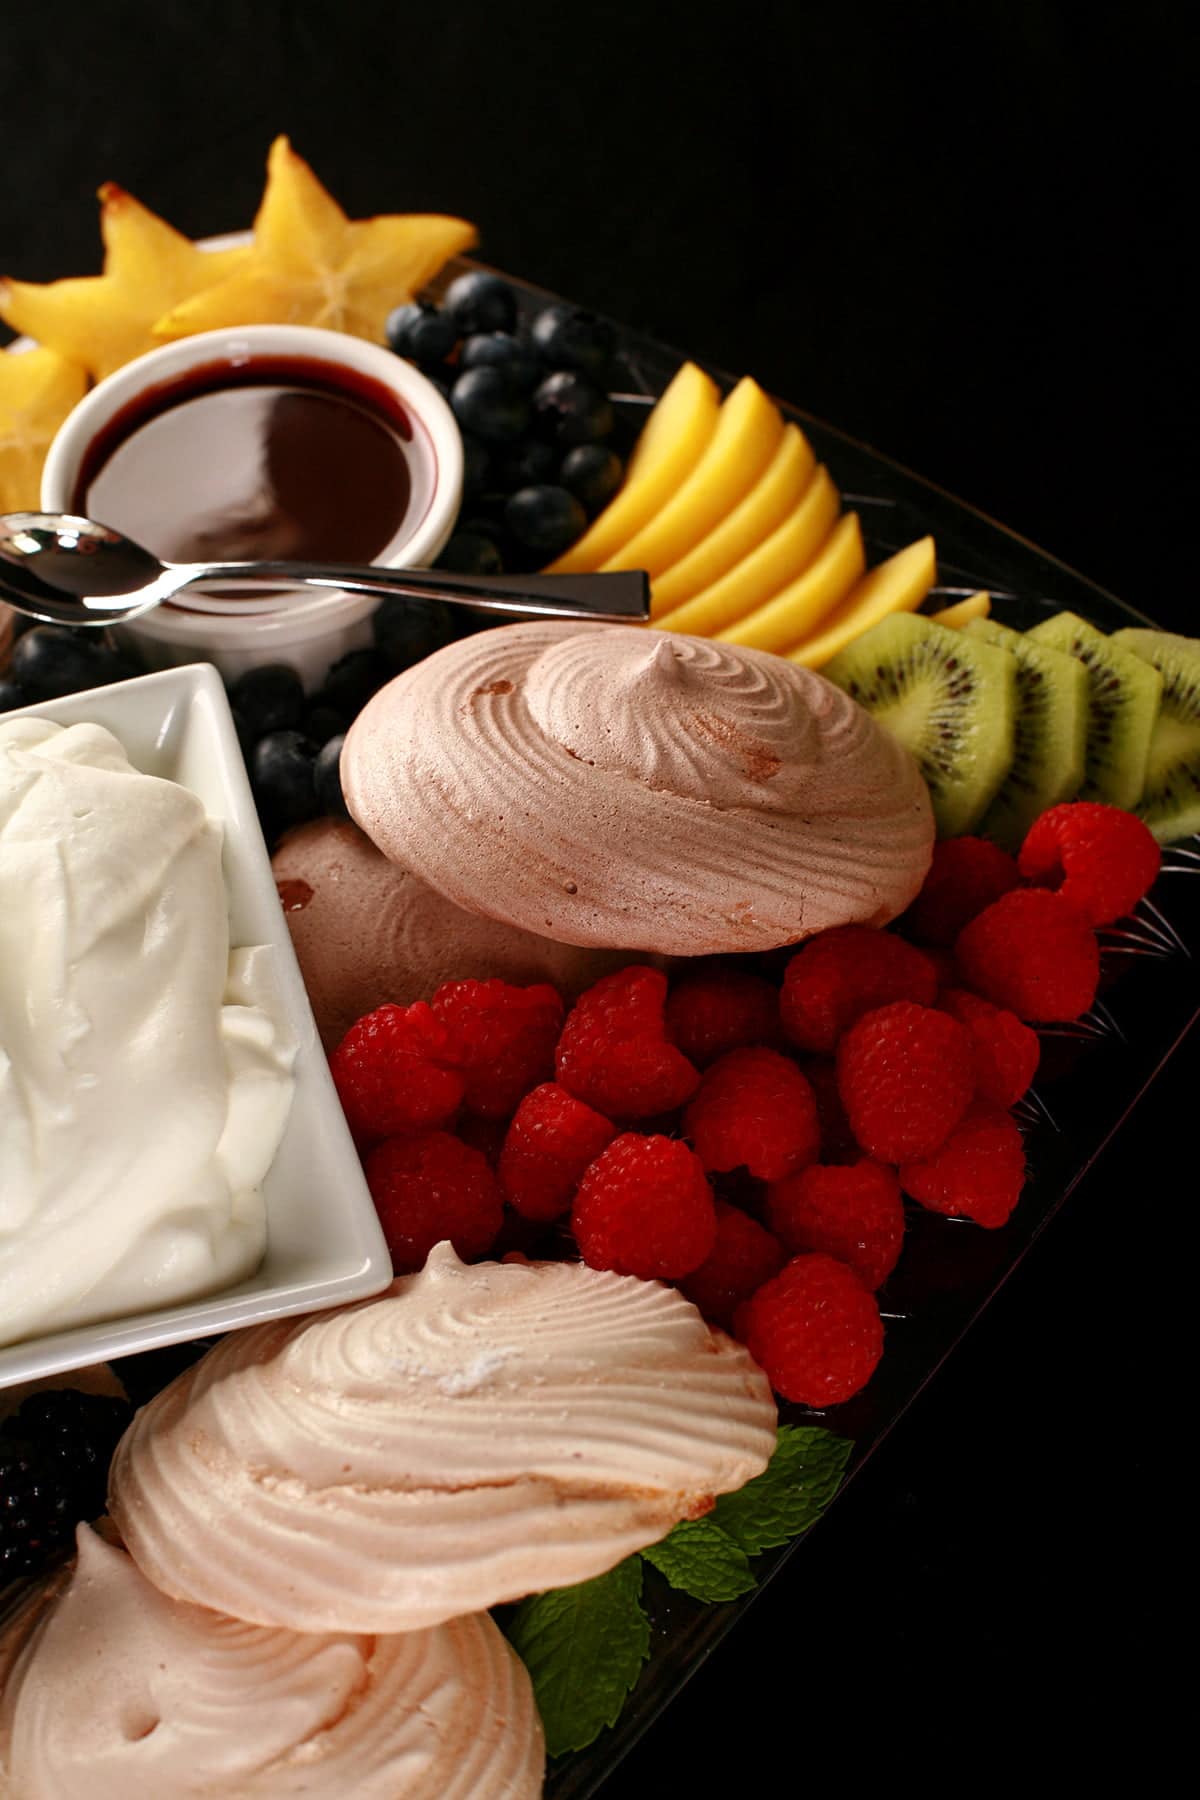 A Pavlova Grazing Board: A bowl of whipped cream and two little bowls of sauce - lemon curd and chocolate sauce - are surrounded by mini pavlova meringues and a selection of fresh fruits.